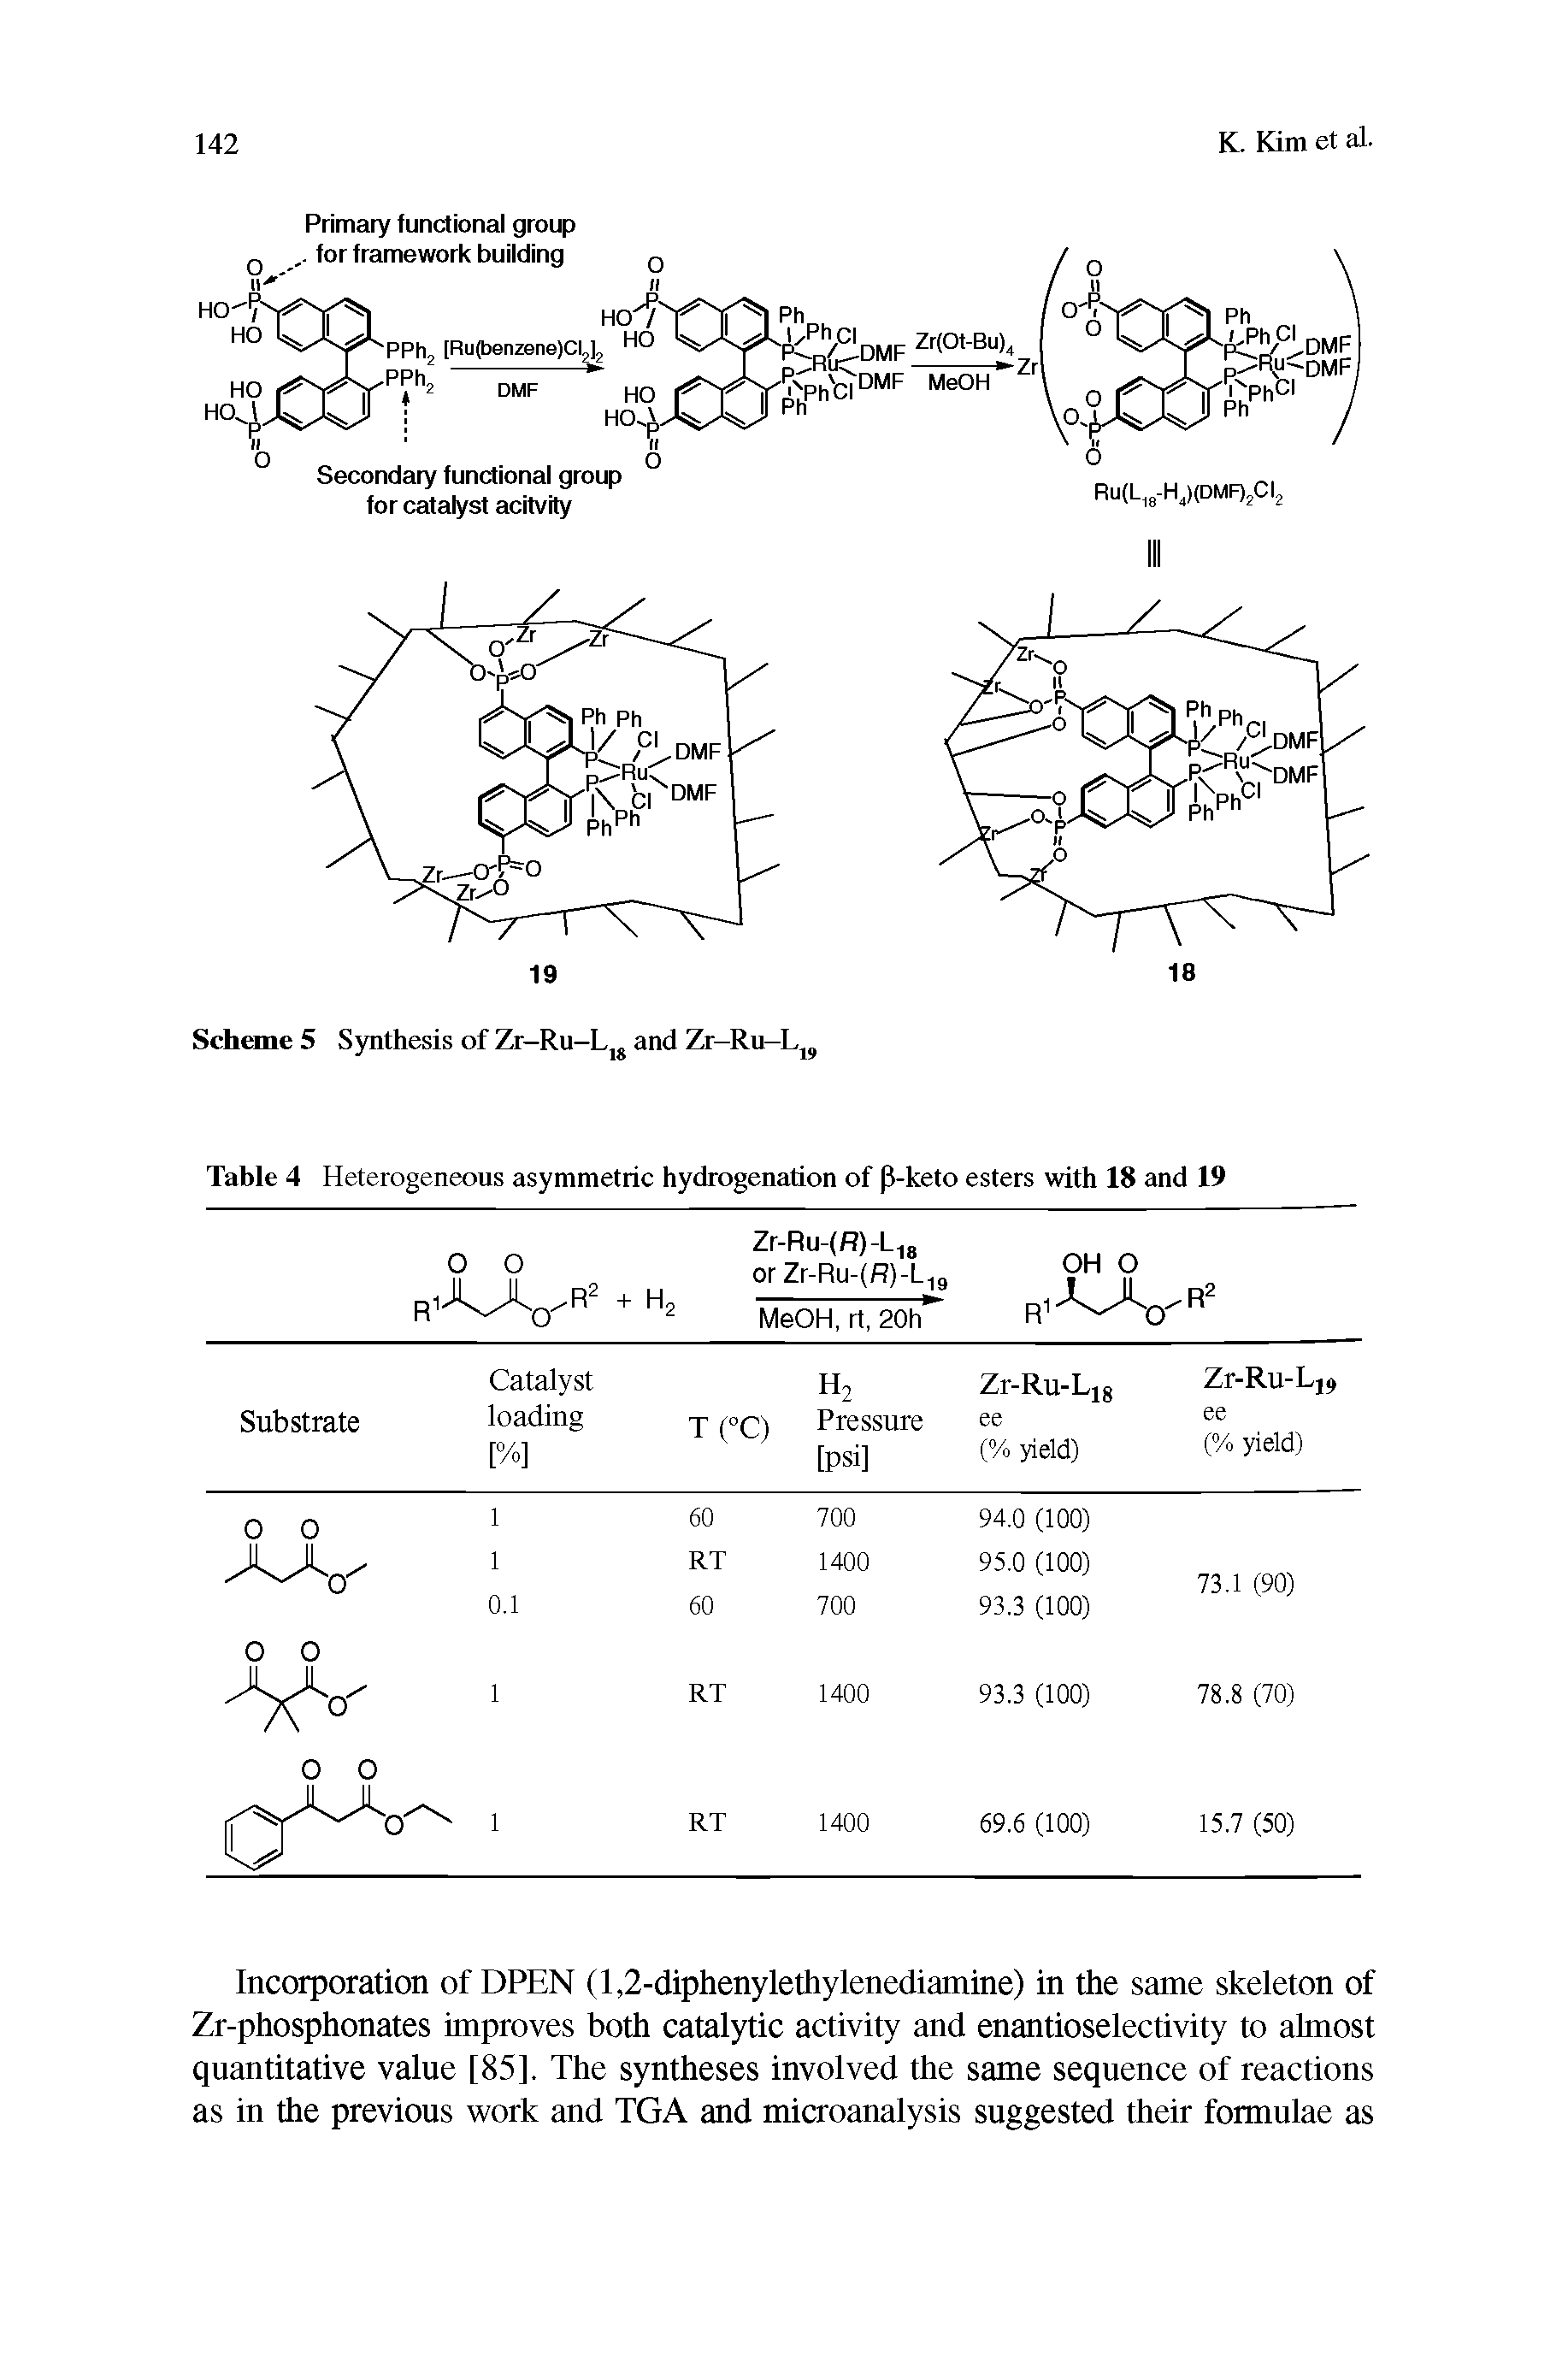 Table 4 Heterogeneous asymmetric hydrogenation of p-keto esters with 18 and 19...